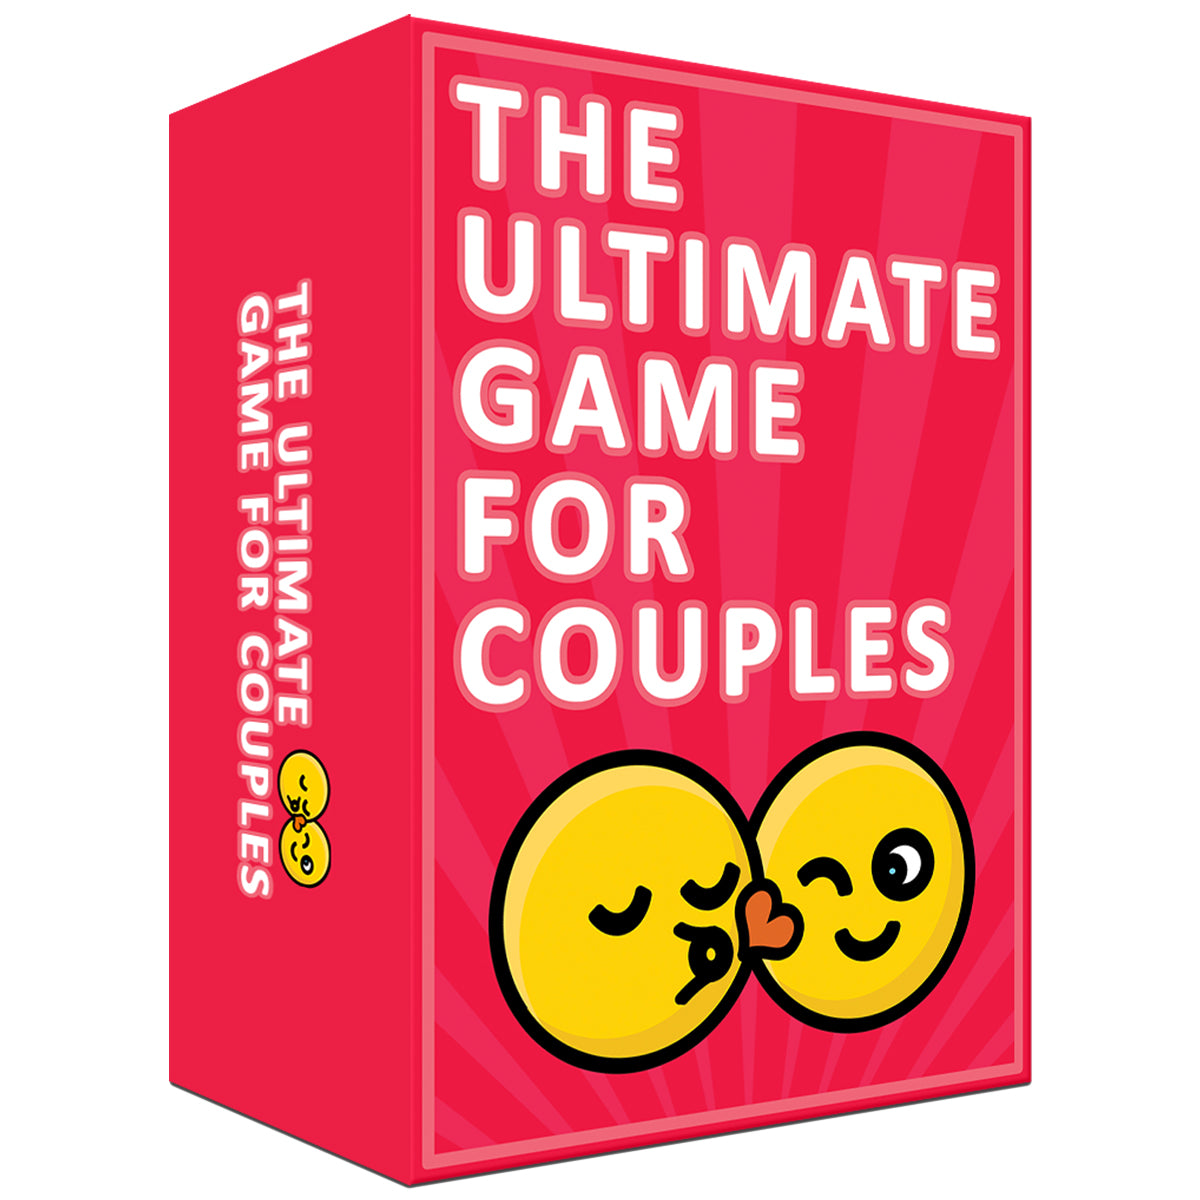 The Ultimate Game for Couples - Great Conversations and Fun Challenges